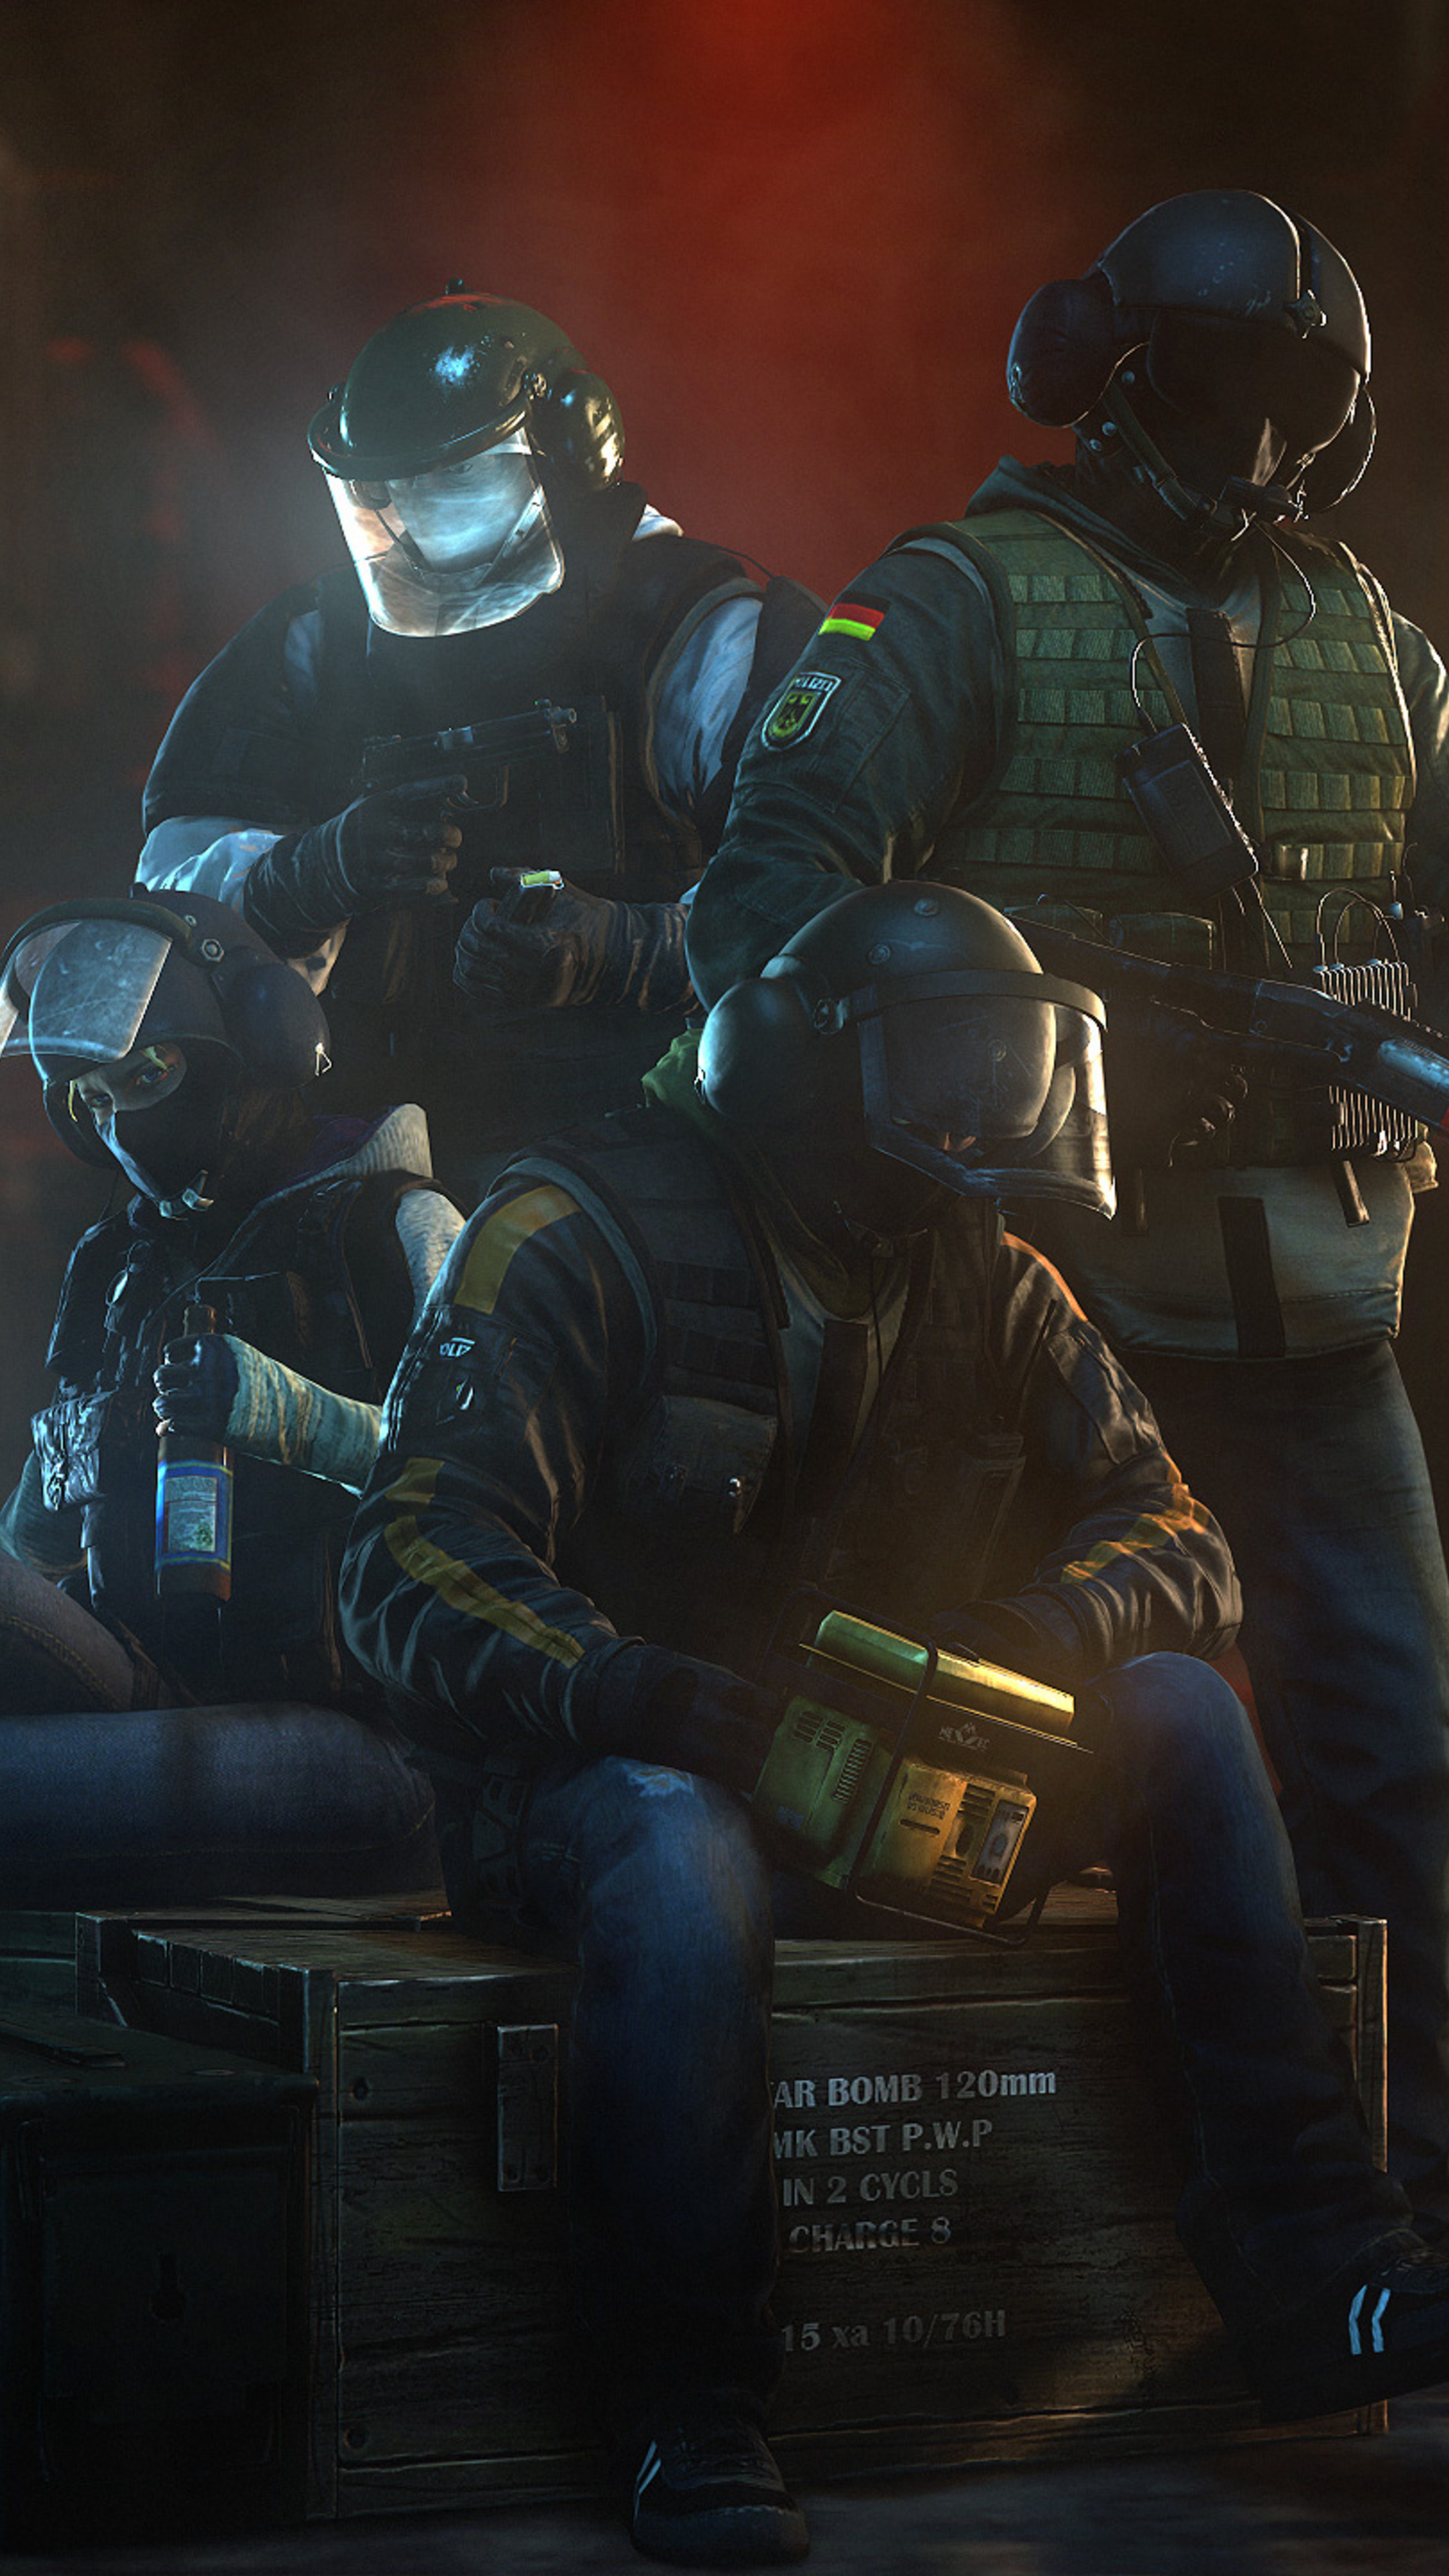 Rainbow Six Extraction: Tom Clancy, Siege, Each play session known as an "incursion". 2160x3840 4K Wallpaper.